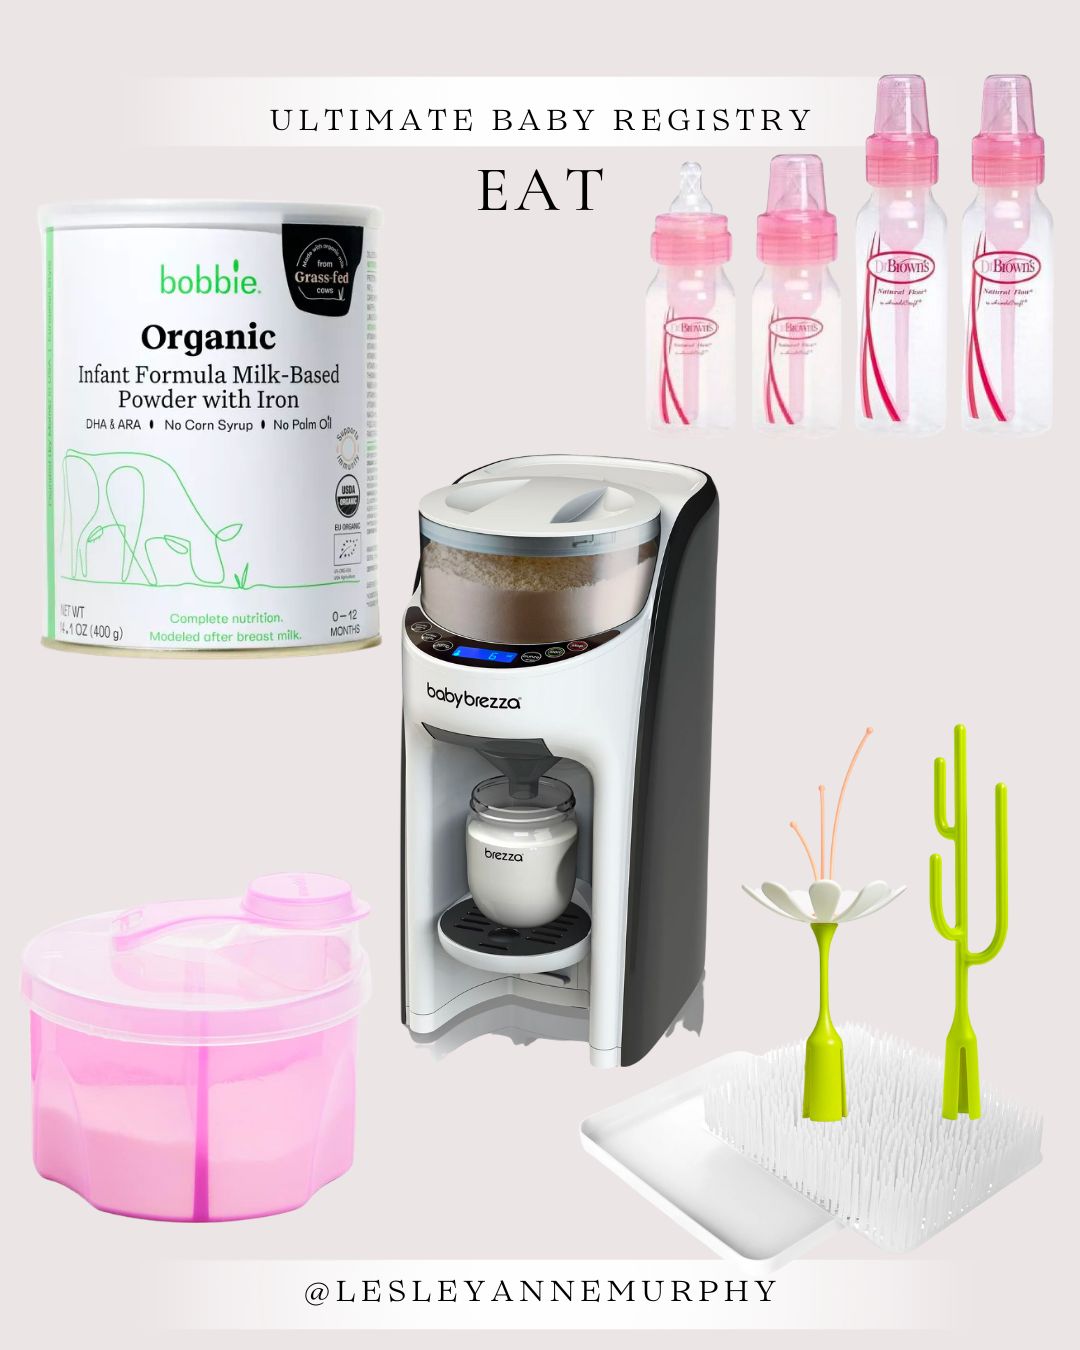 Our favorite bobbie formula, baby brezza, and other newborn eat must haves